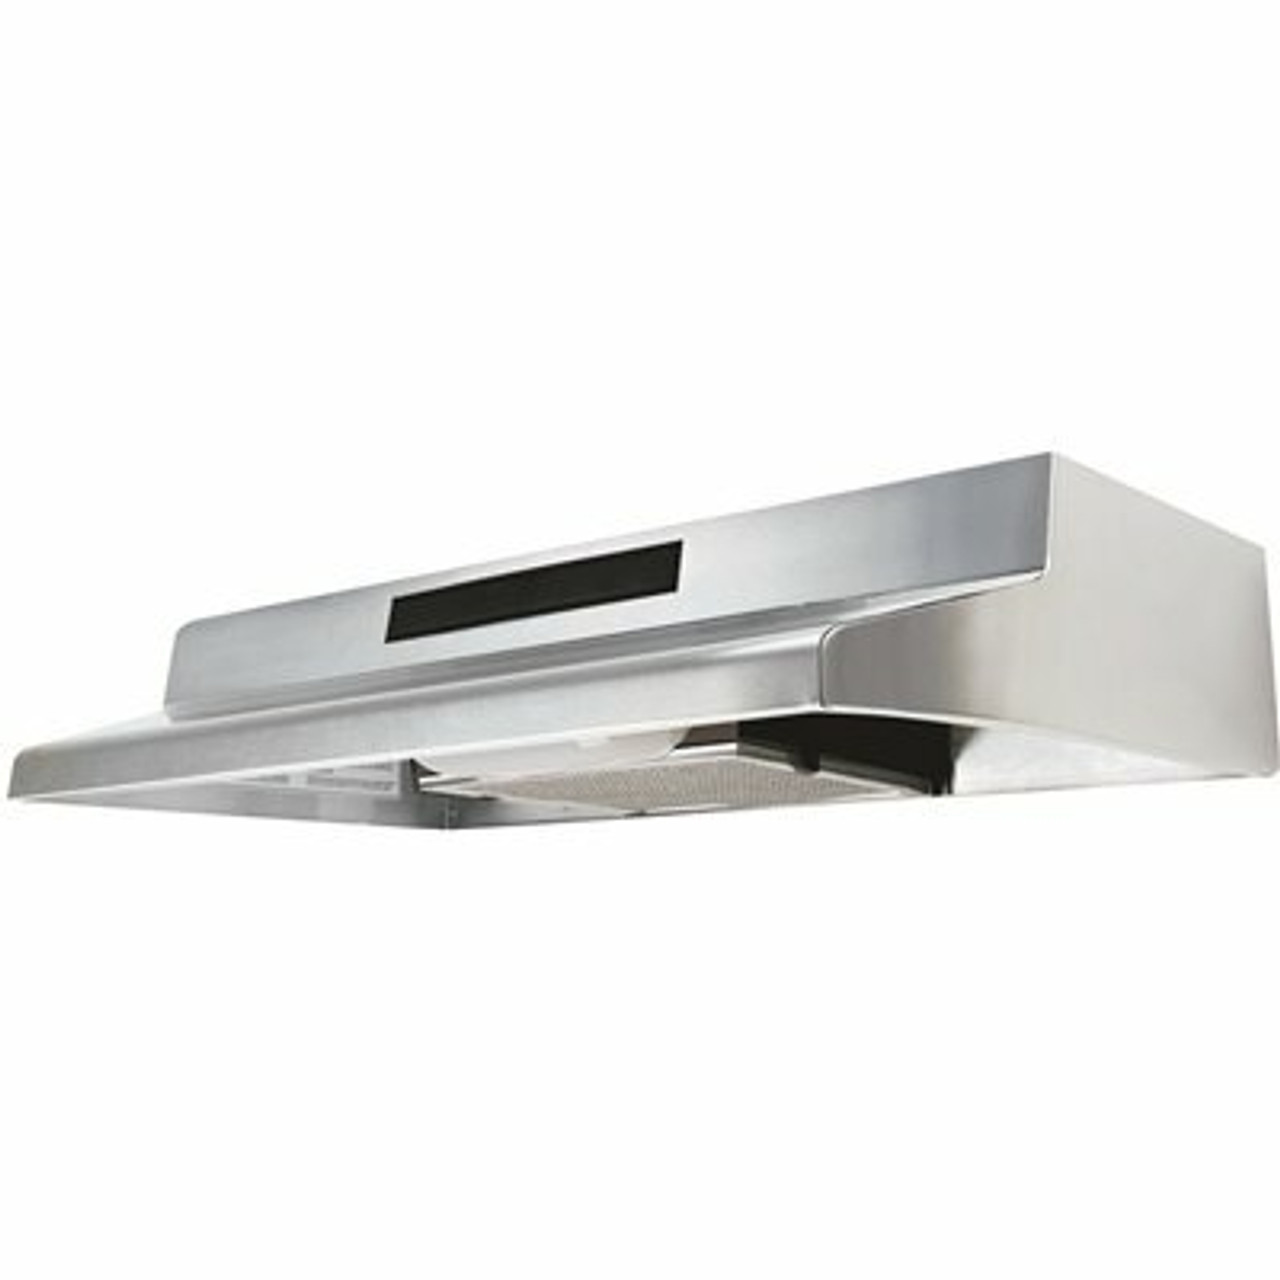 Air King Energy Star Certified 30 In. Under Cabinet Convertible Range Hood With Light In Stainless Steel